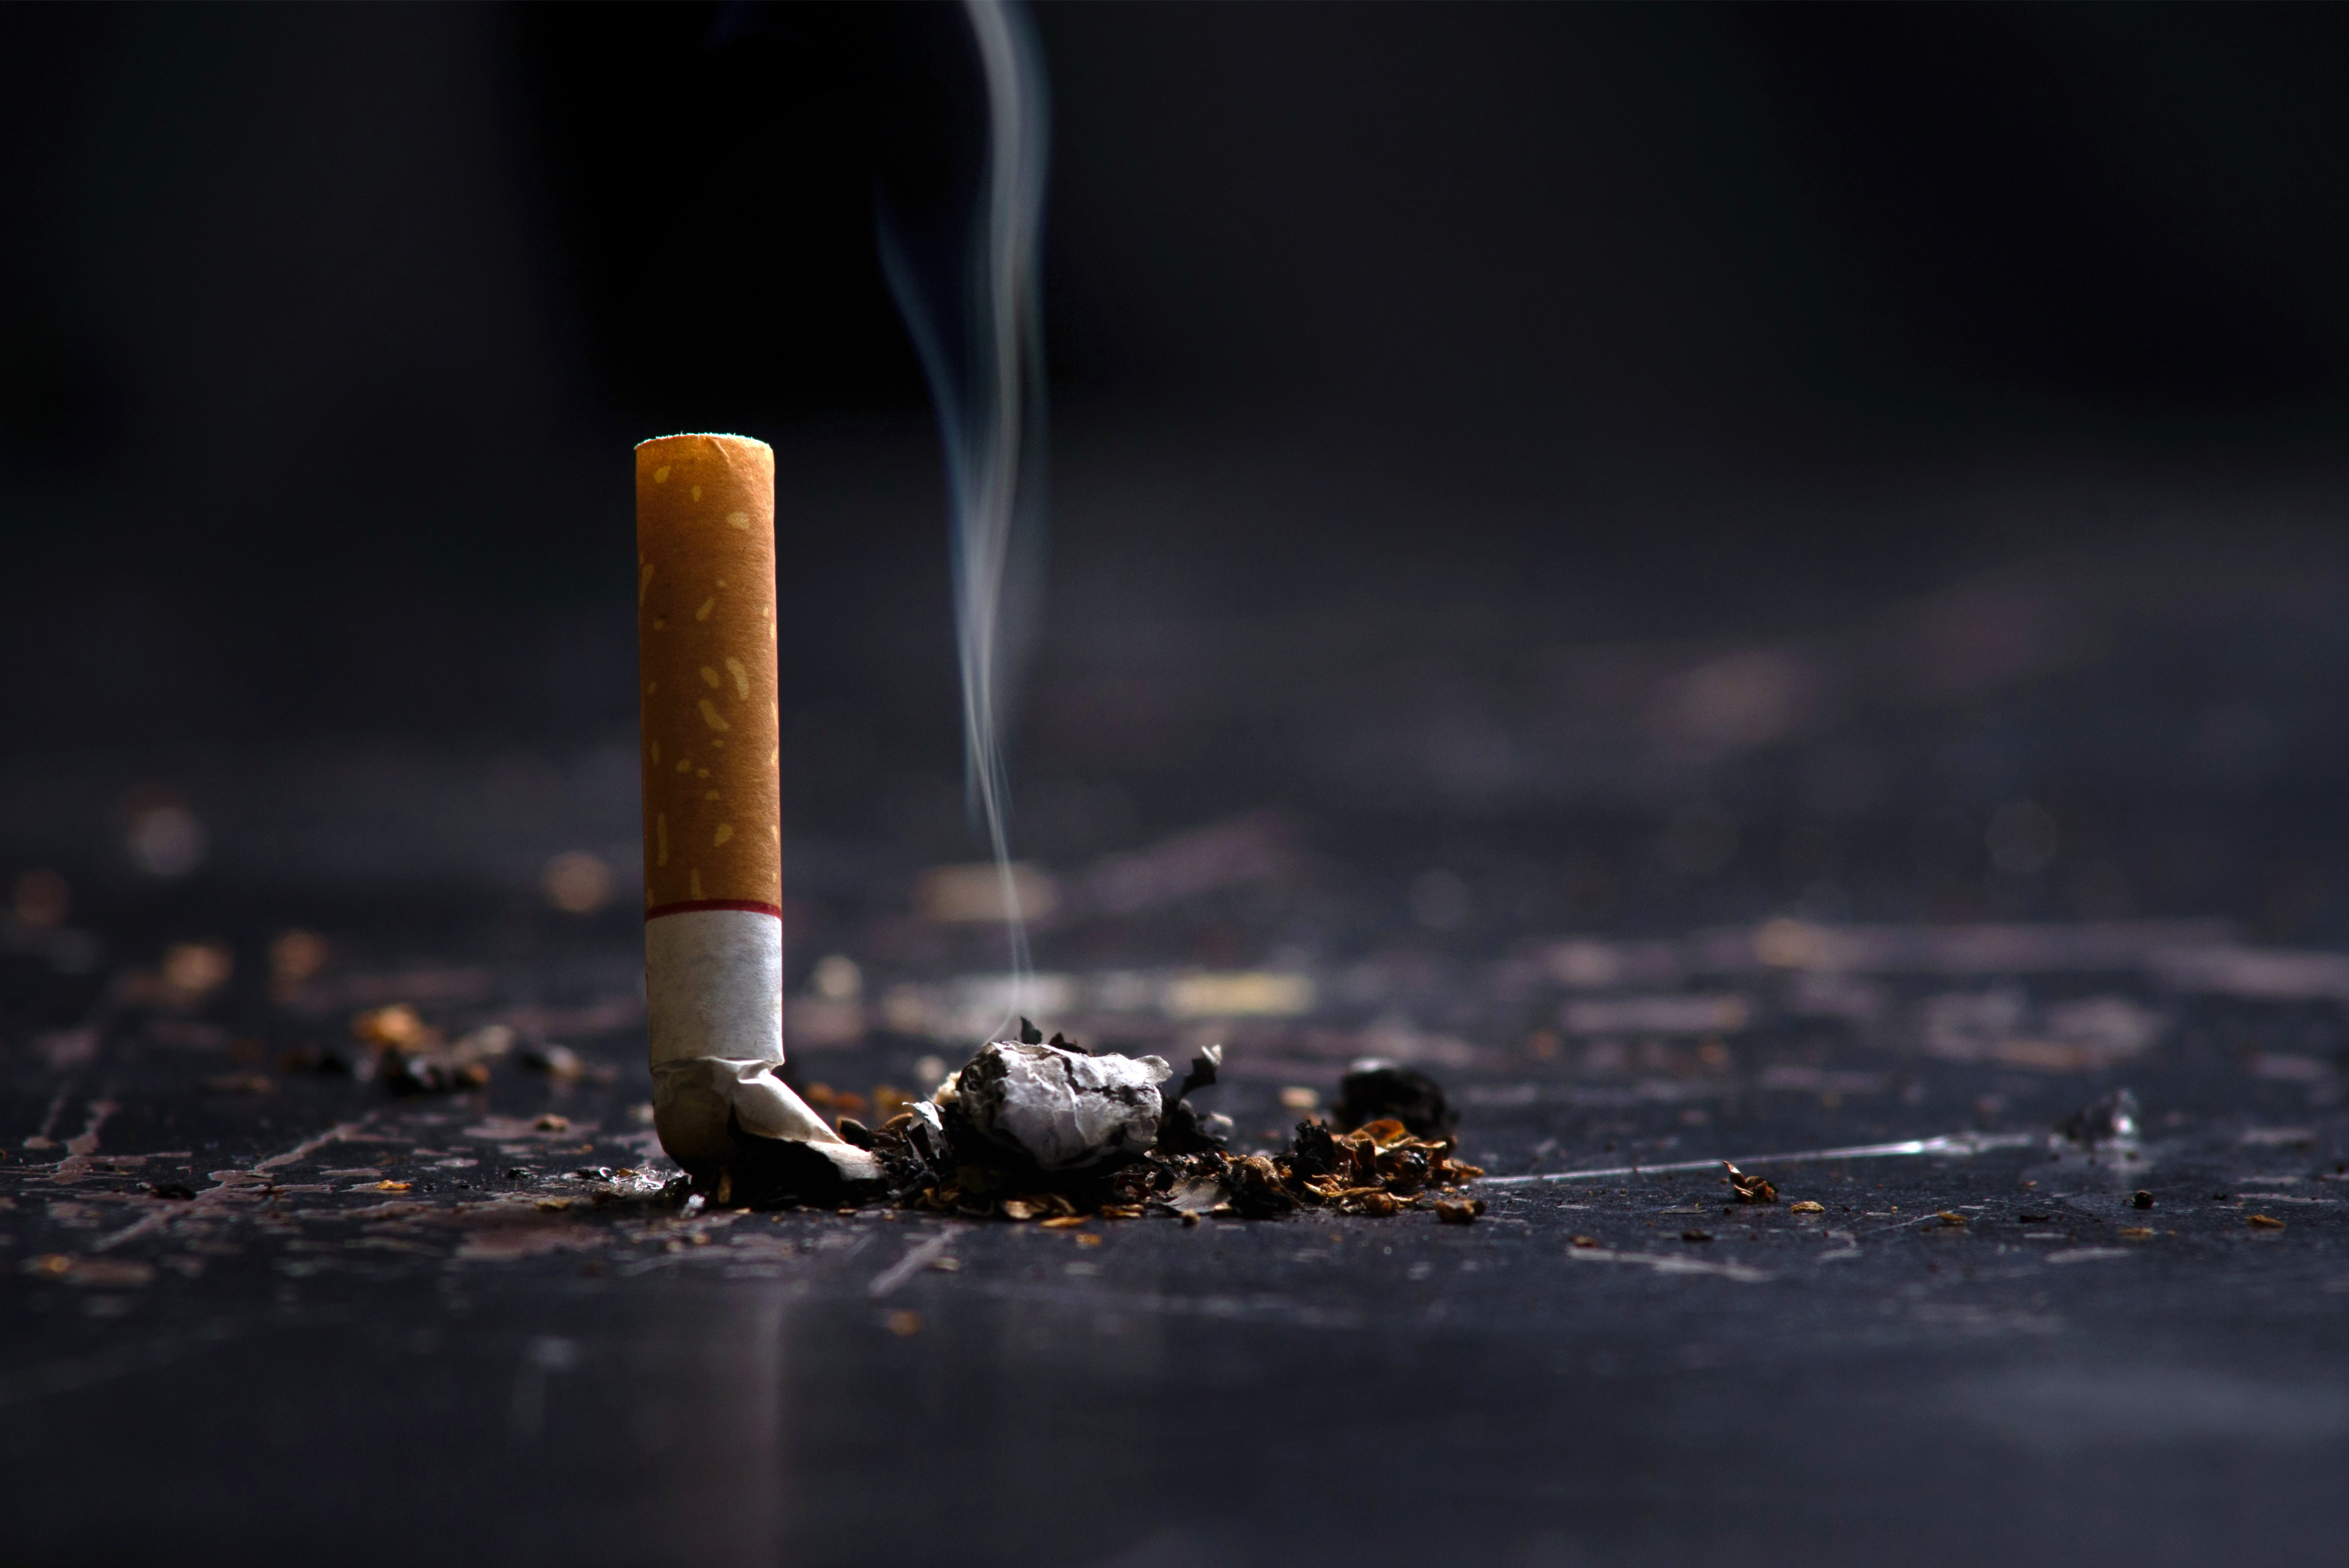 Cigarette butts are among the most littered items in the world. Photo: Shutterstock Images